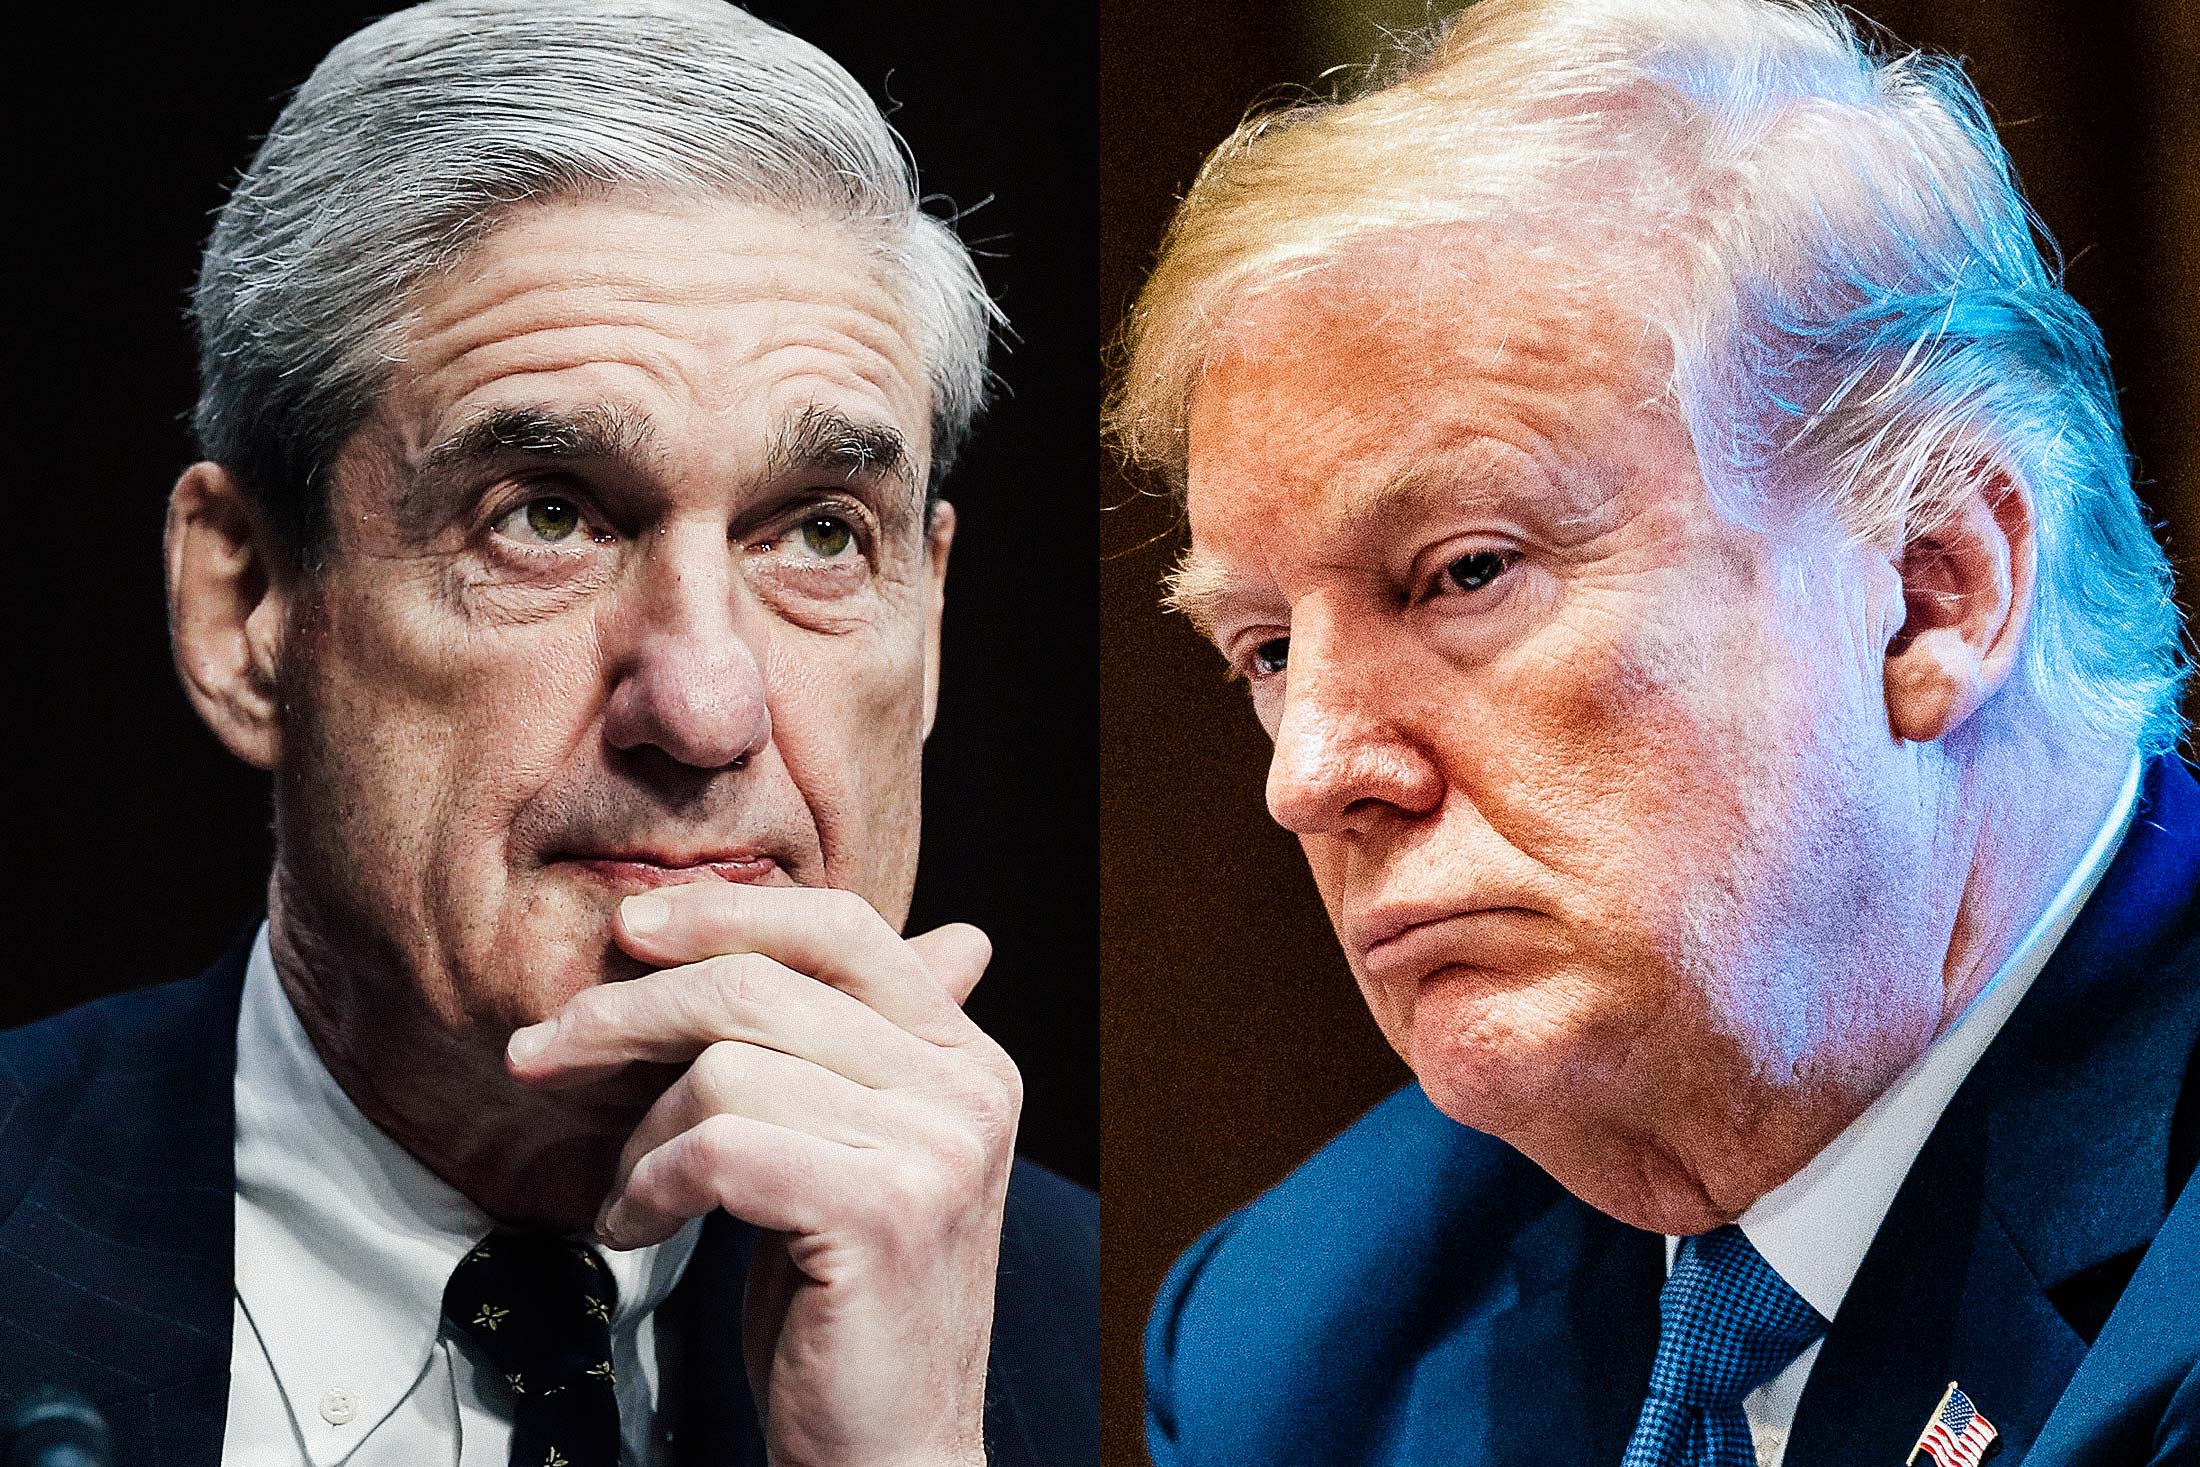 Side by side headshots of Mueller and Trump.